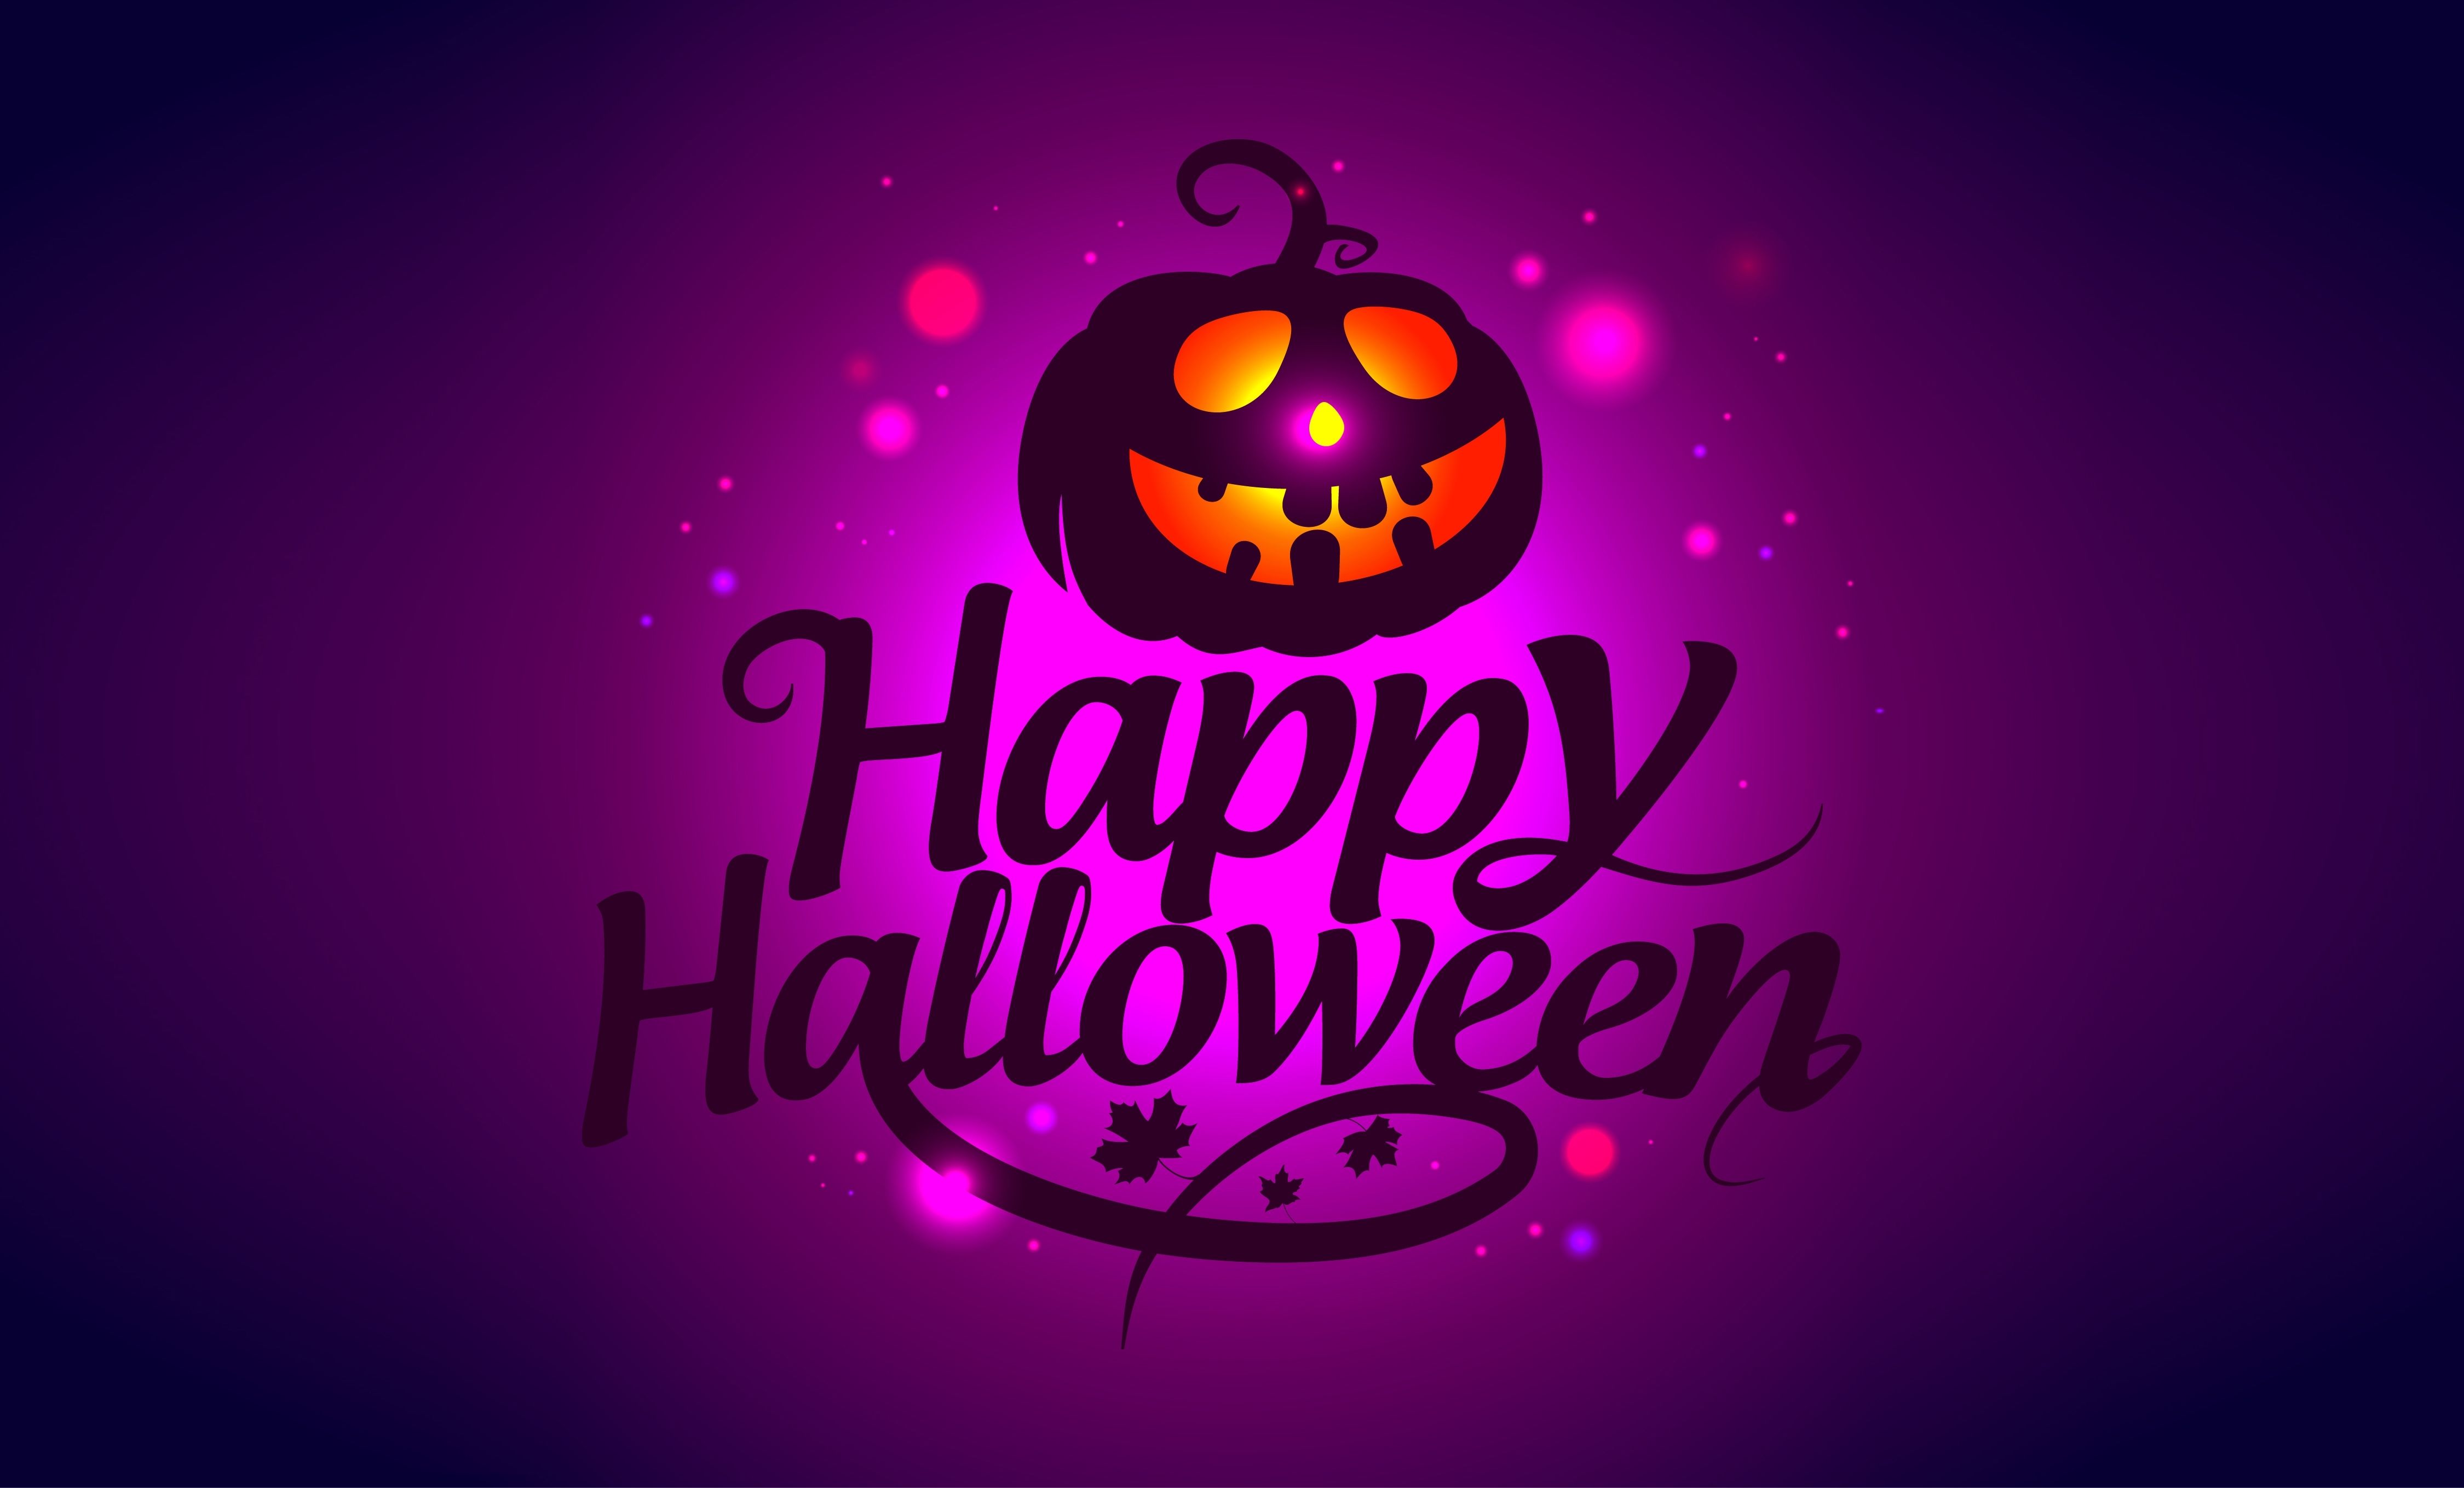 Wallpaper Happy Halloween, 4K, Celebrations / Most Popular,. Wallpaper for iPhone, Android, Mobile and Desktop